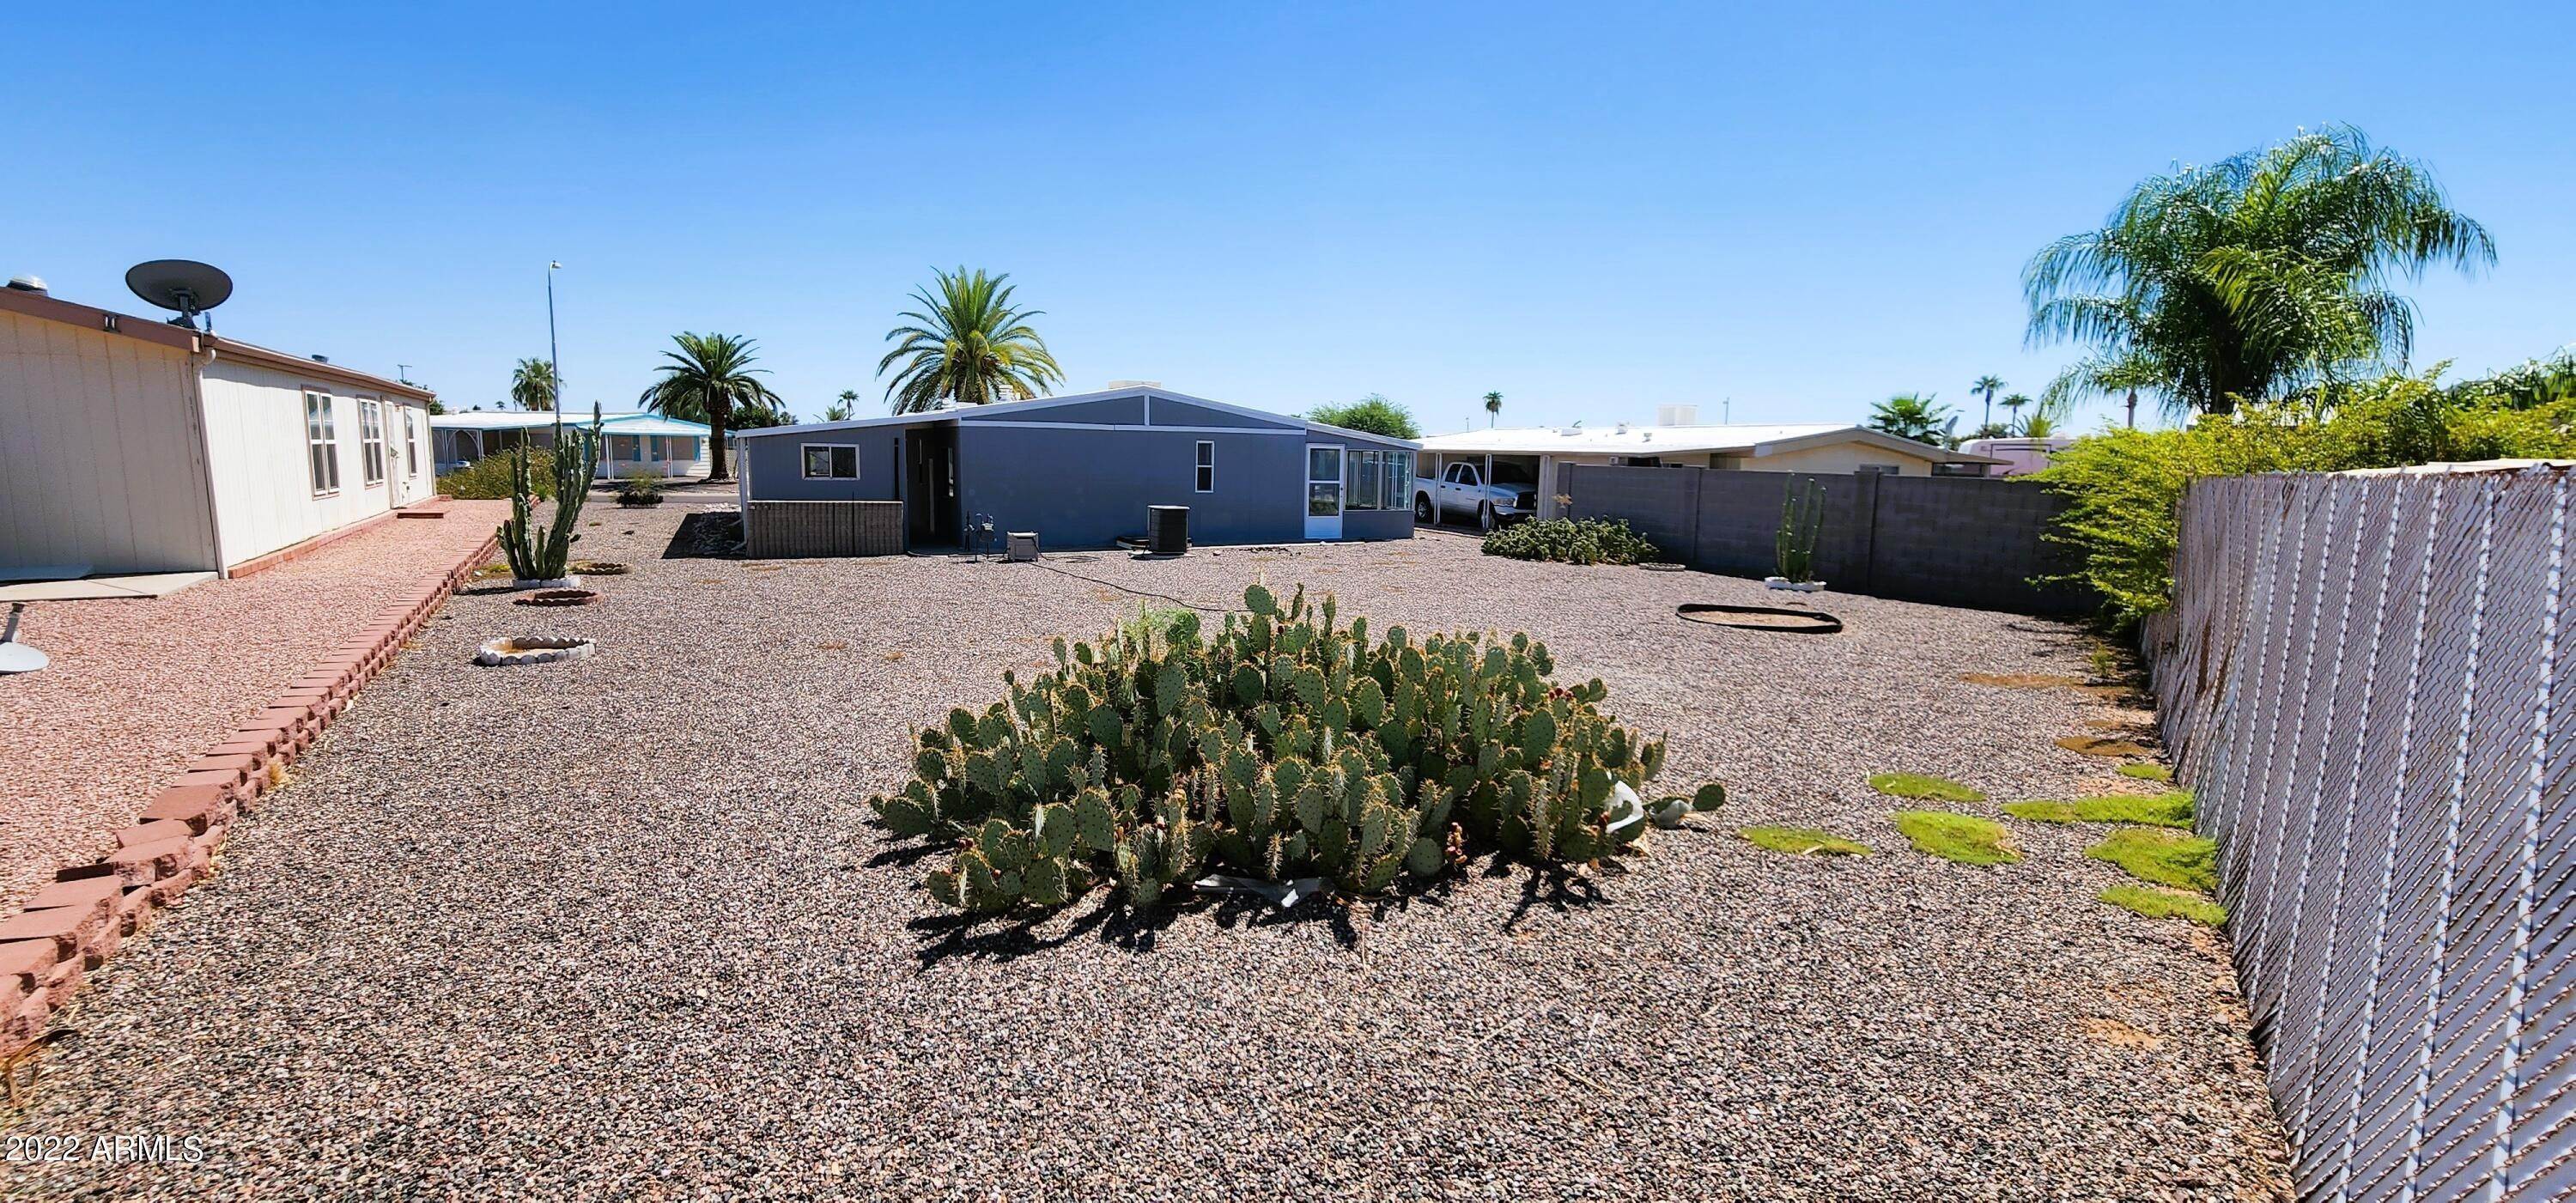 22. Manufactured Home for Sale at Mesa, AZ 85208